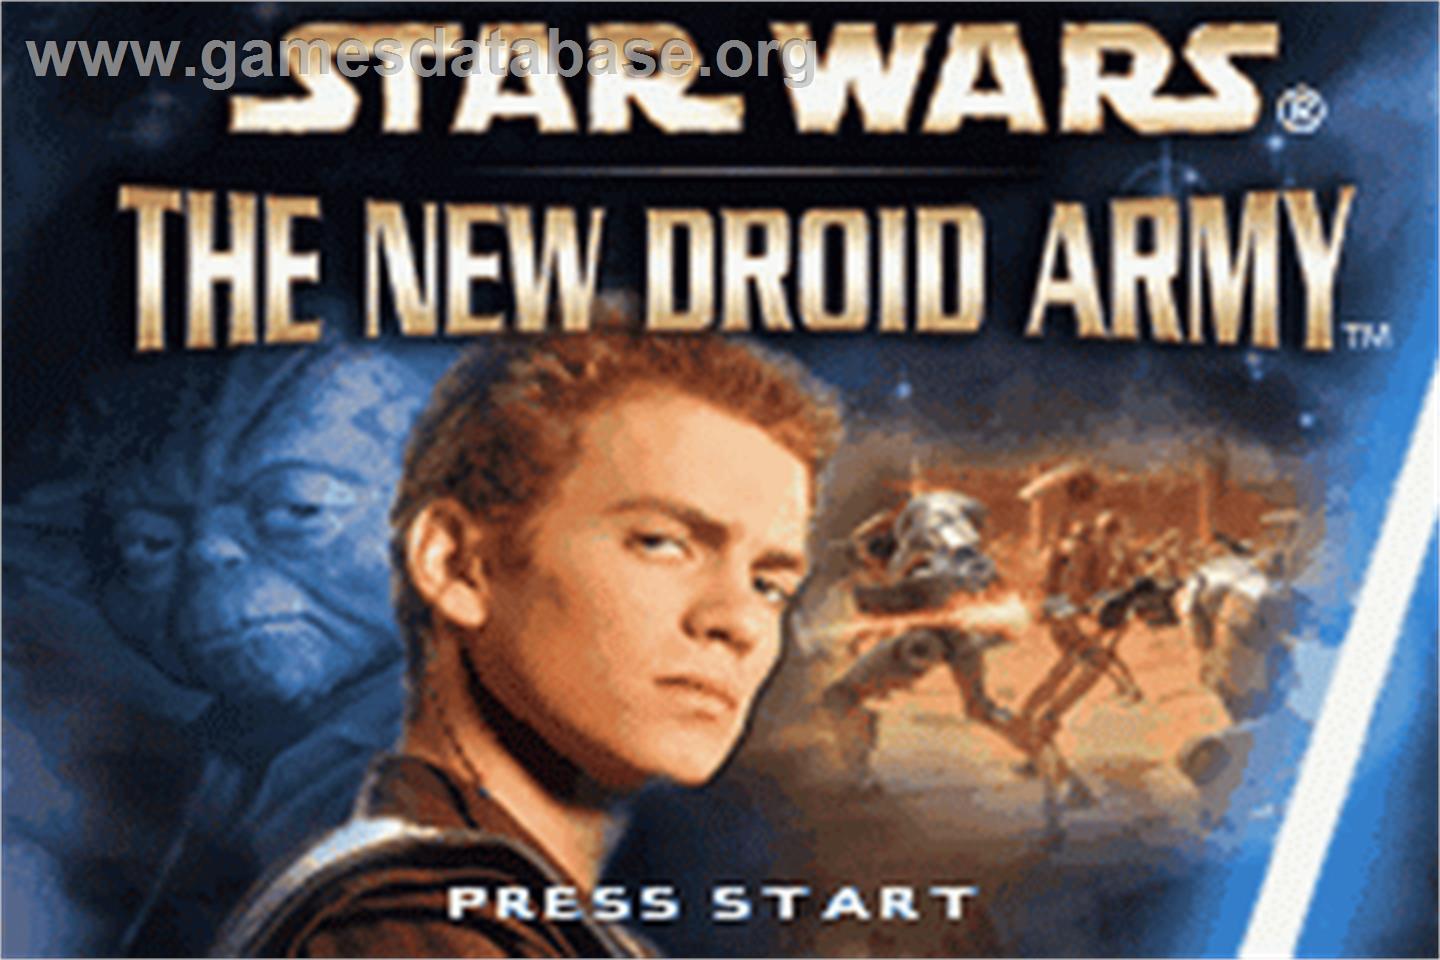 Star Wars: The New Droid Army - Nintendo Game Boy Advance - Artwork - Title Screen